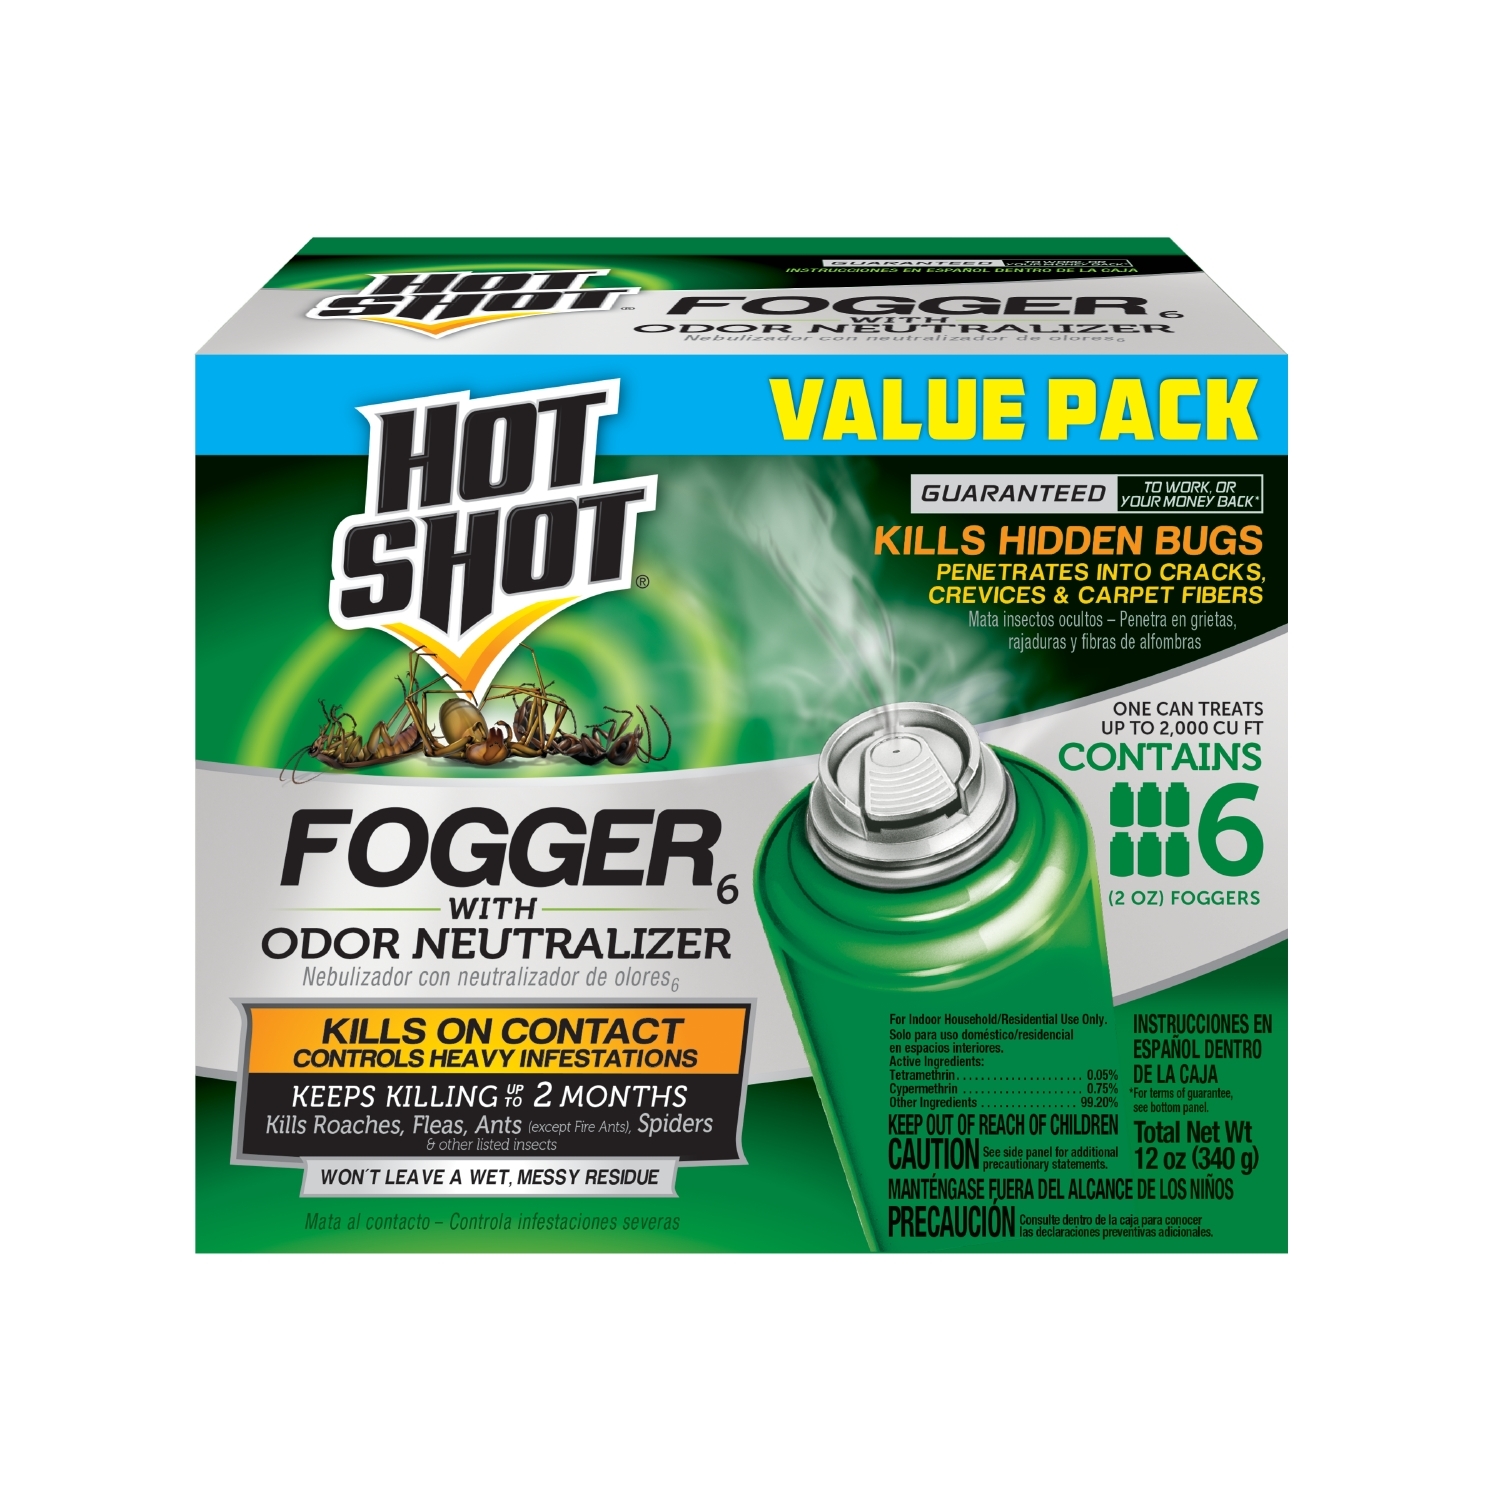 Hot Shot Fogger with Odor Neutralizer, Kills Roaches, Ants, Spiders & Fleas Pack of 6 - image 1 of 11